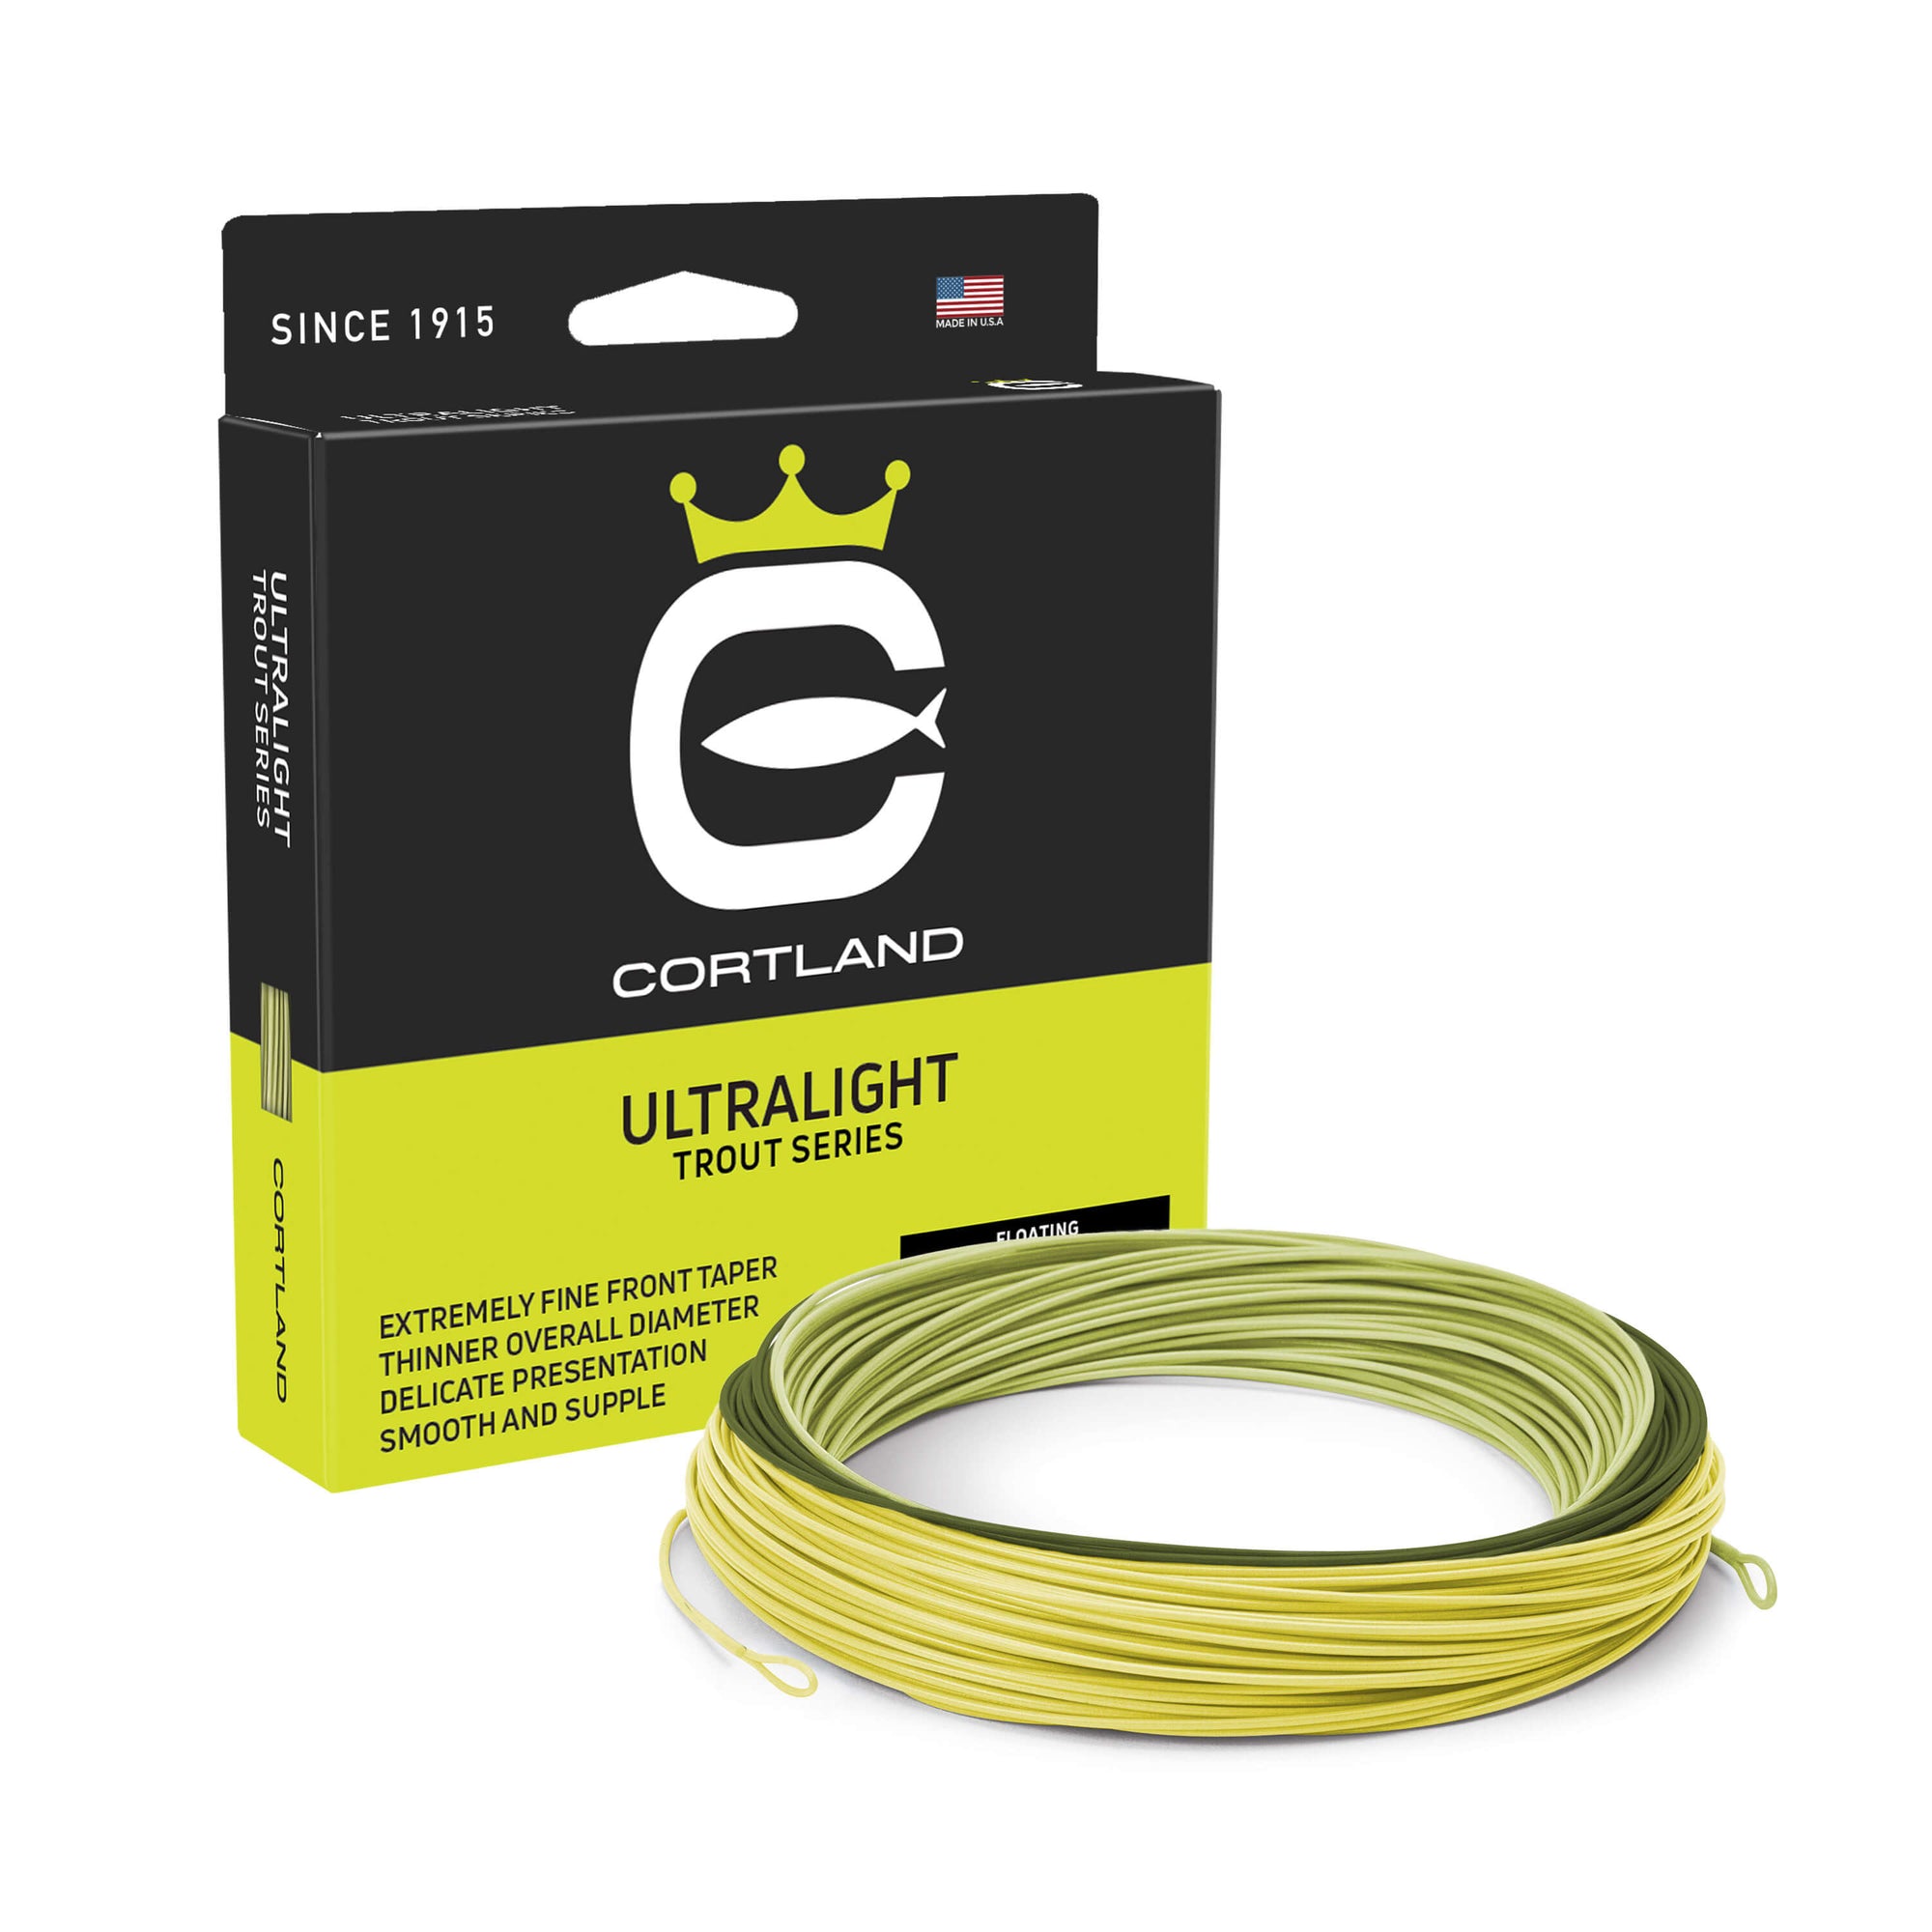 Ultralight fly line box and coil. The color of the coil is aqua green, dark green, and pale yellow. The box has the Cortland logo and is black and greenish yellow.